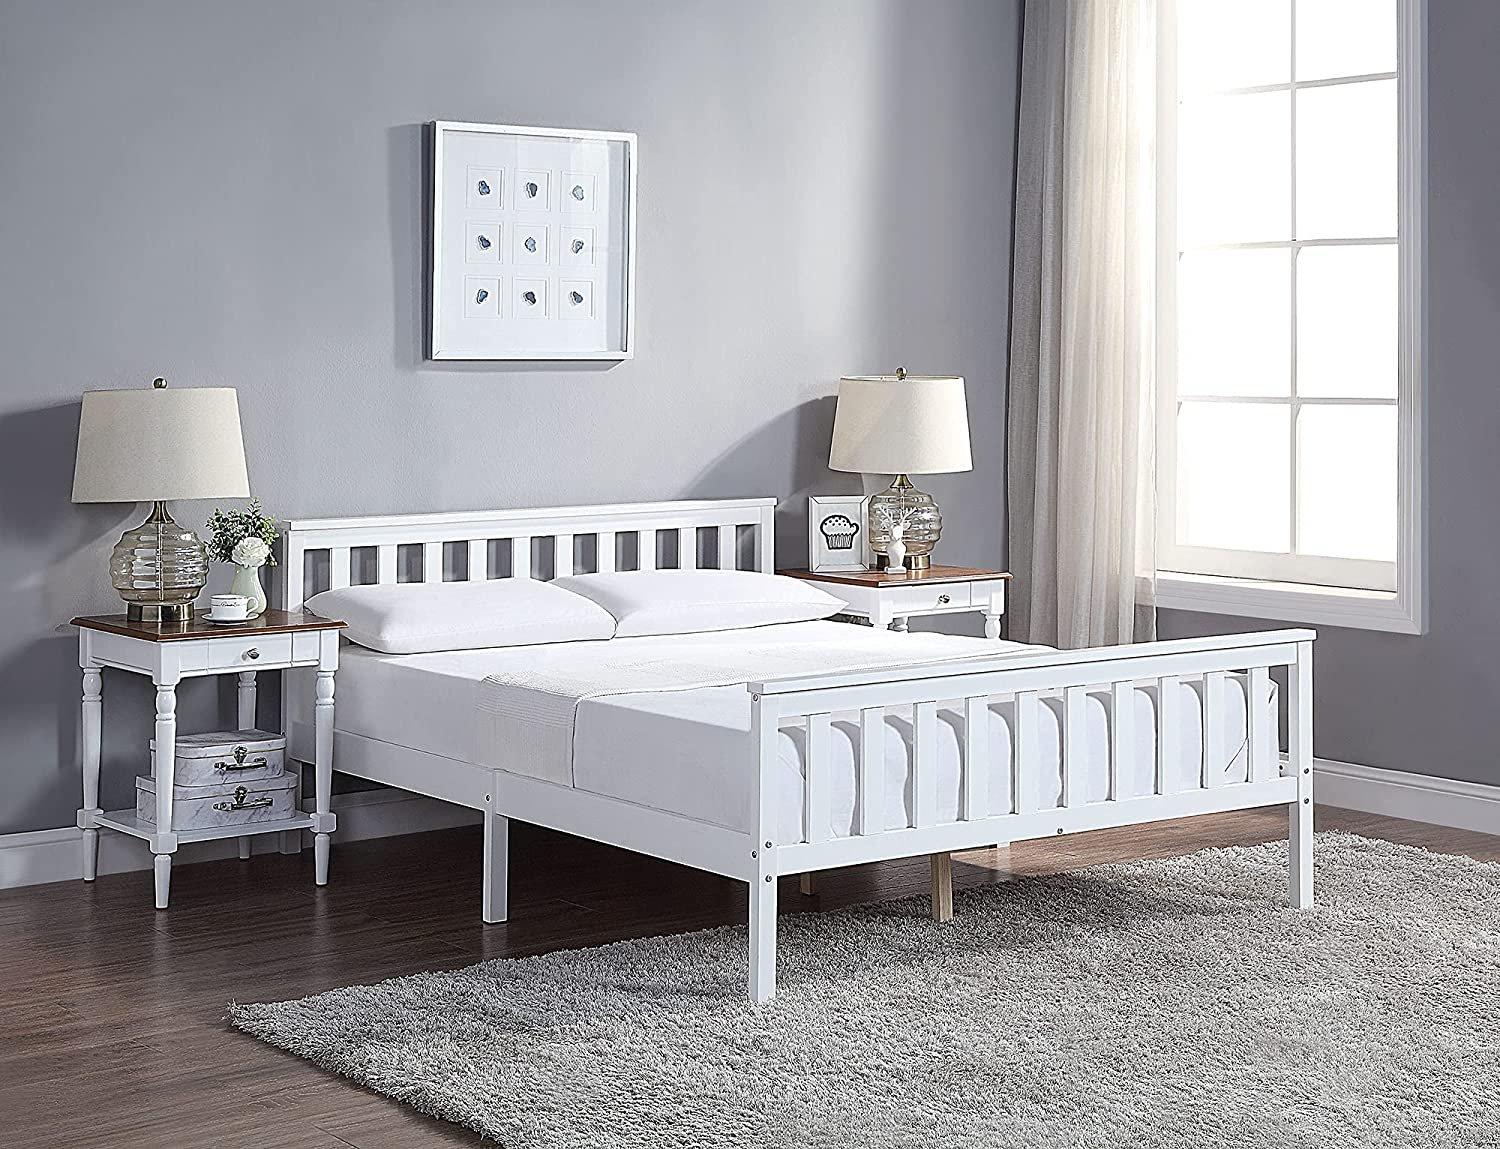 Solid Wooden Bed Frame For Adults & Kids